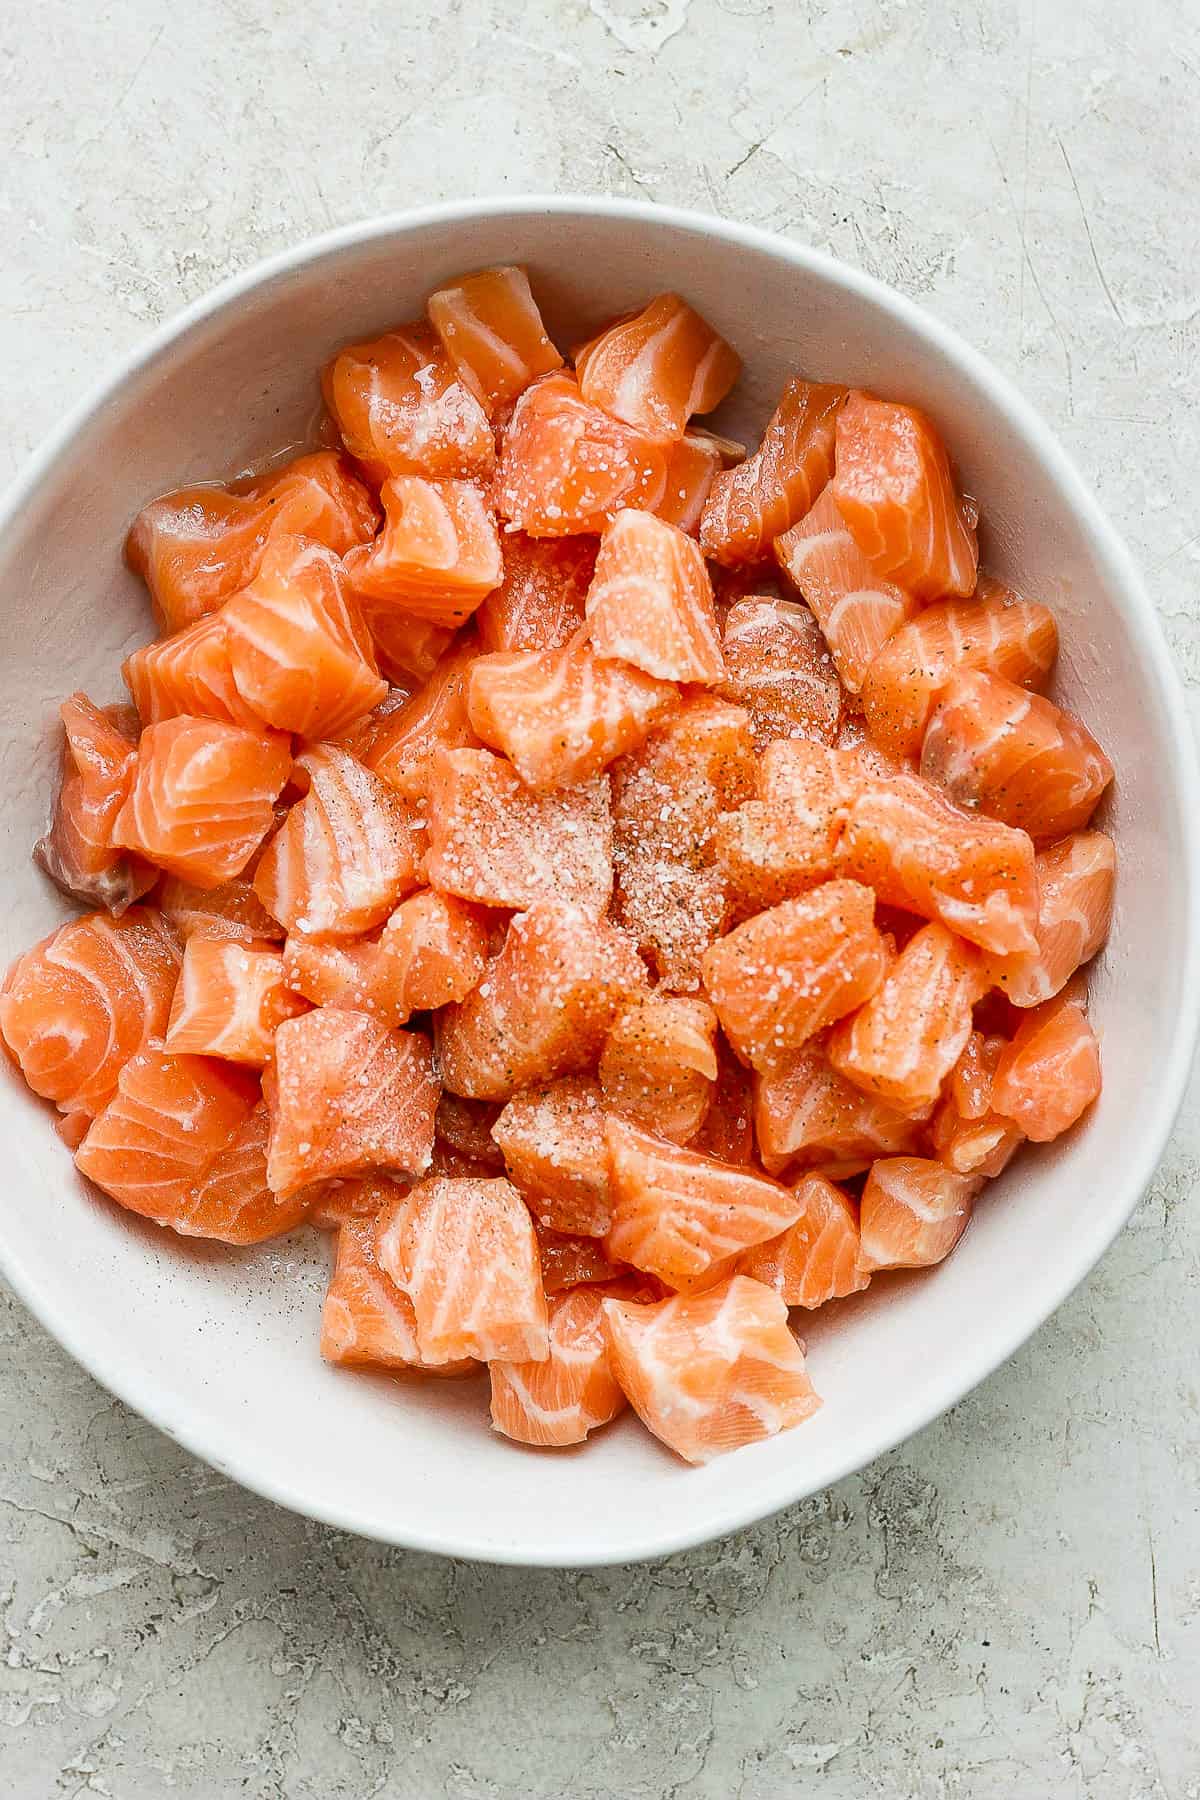 Salmon bites in a bowl seasoned with kosher salt, black pepper, and tossed in oil.